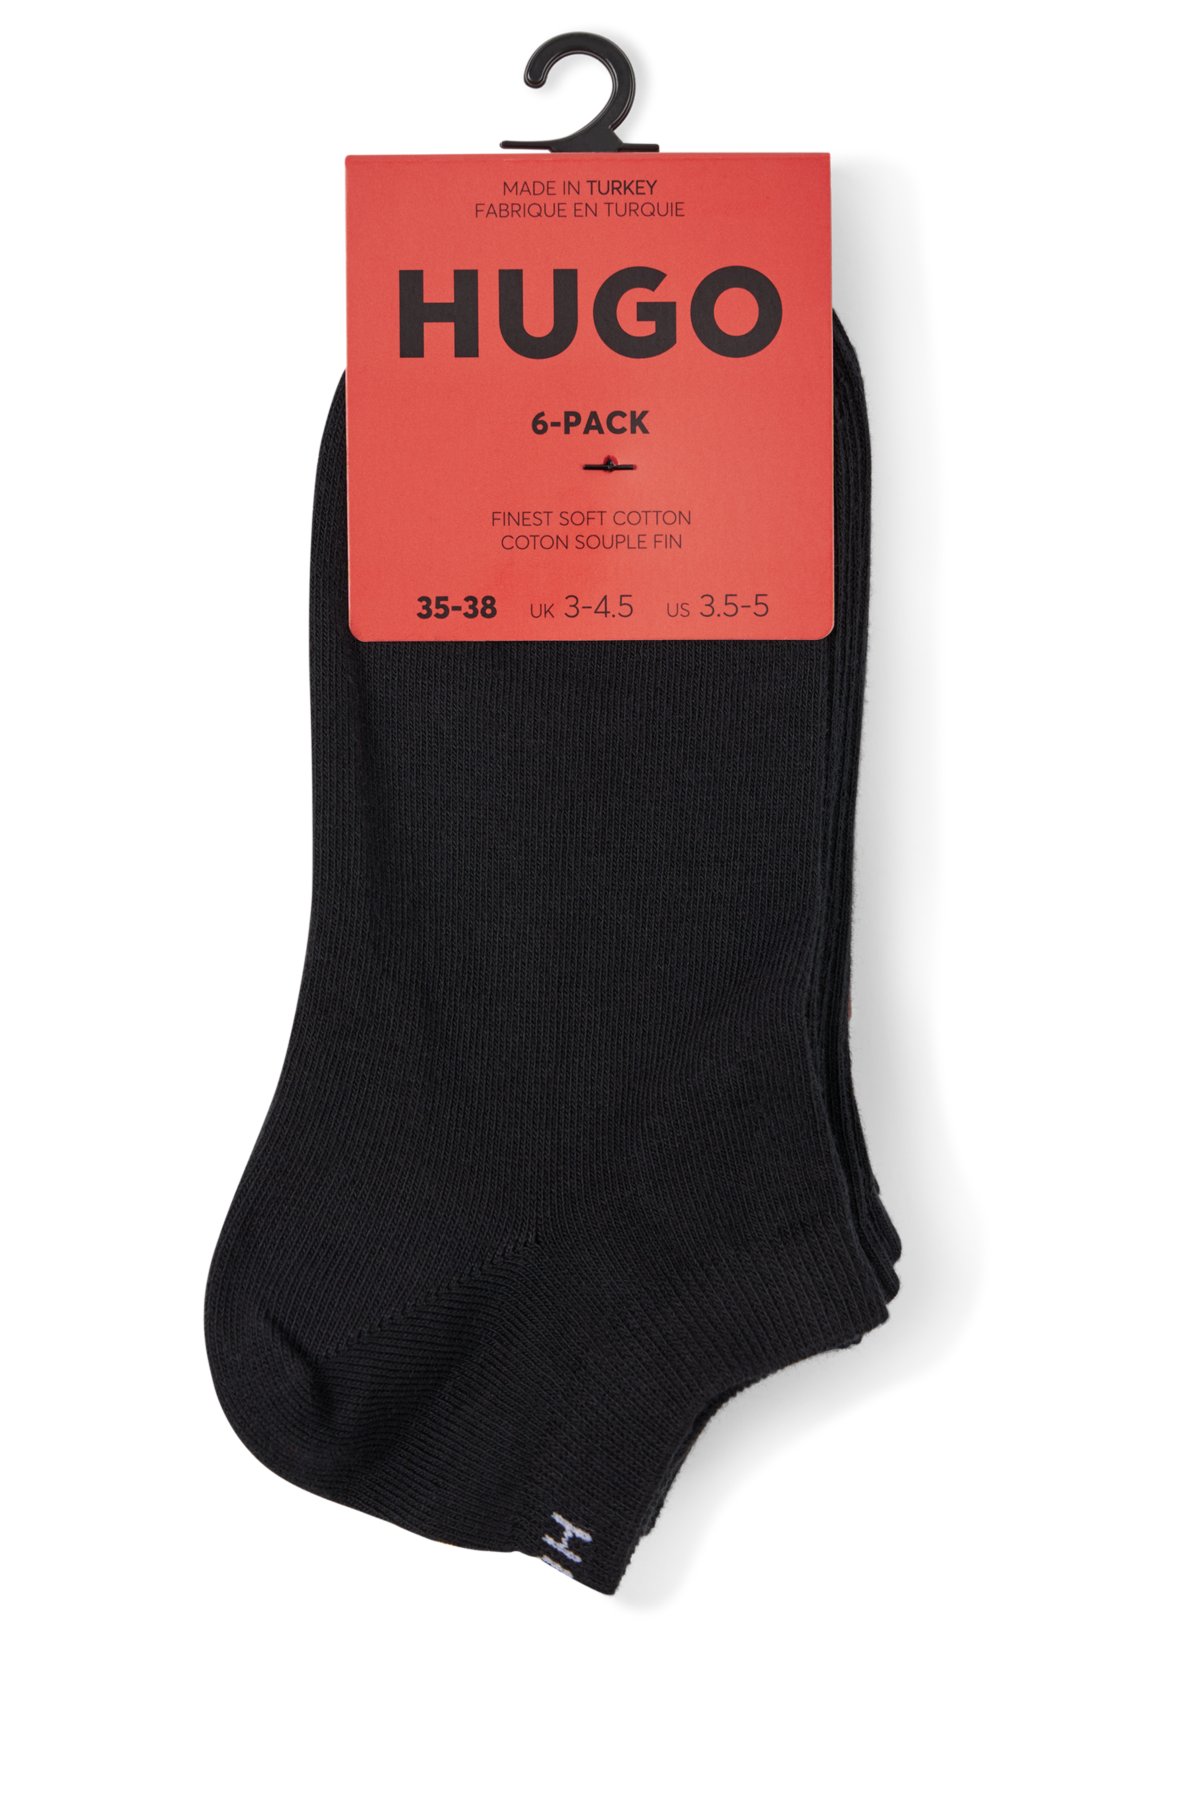 Six-pack of socks in a cotton blend, Black